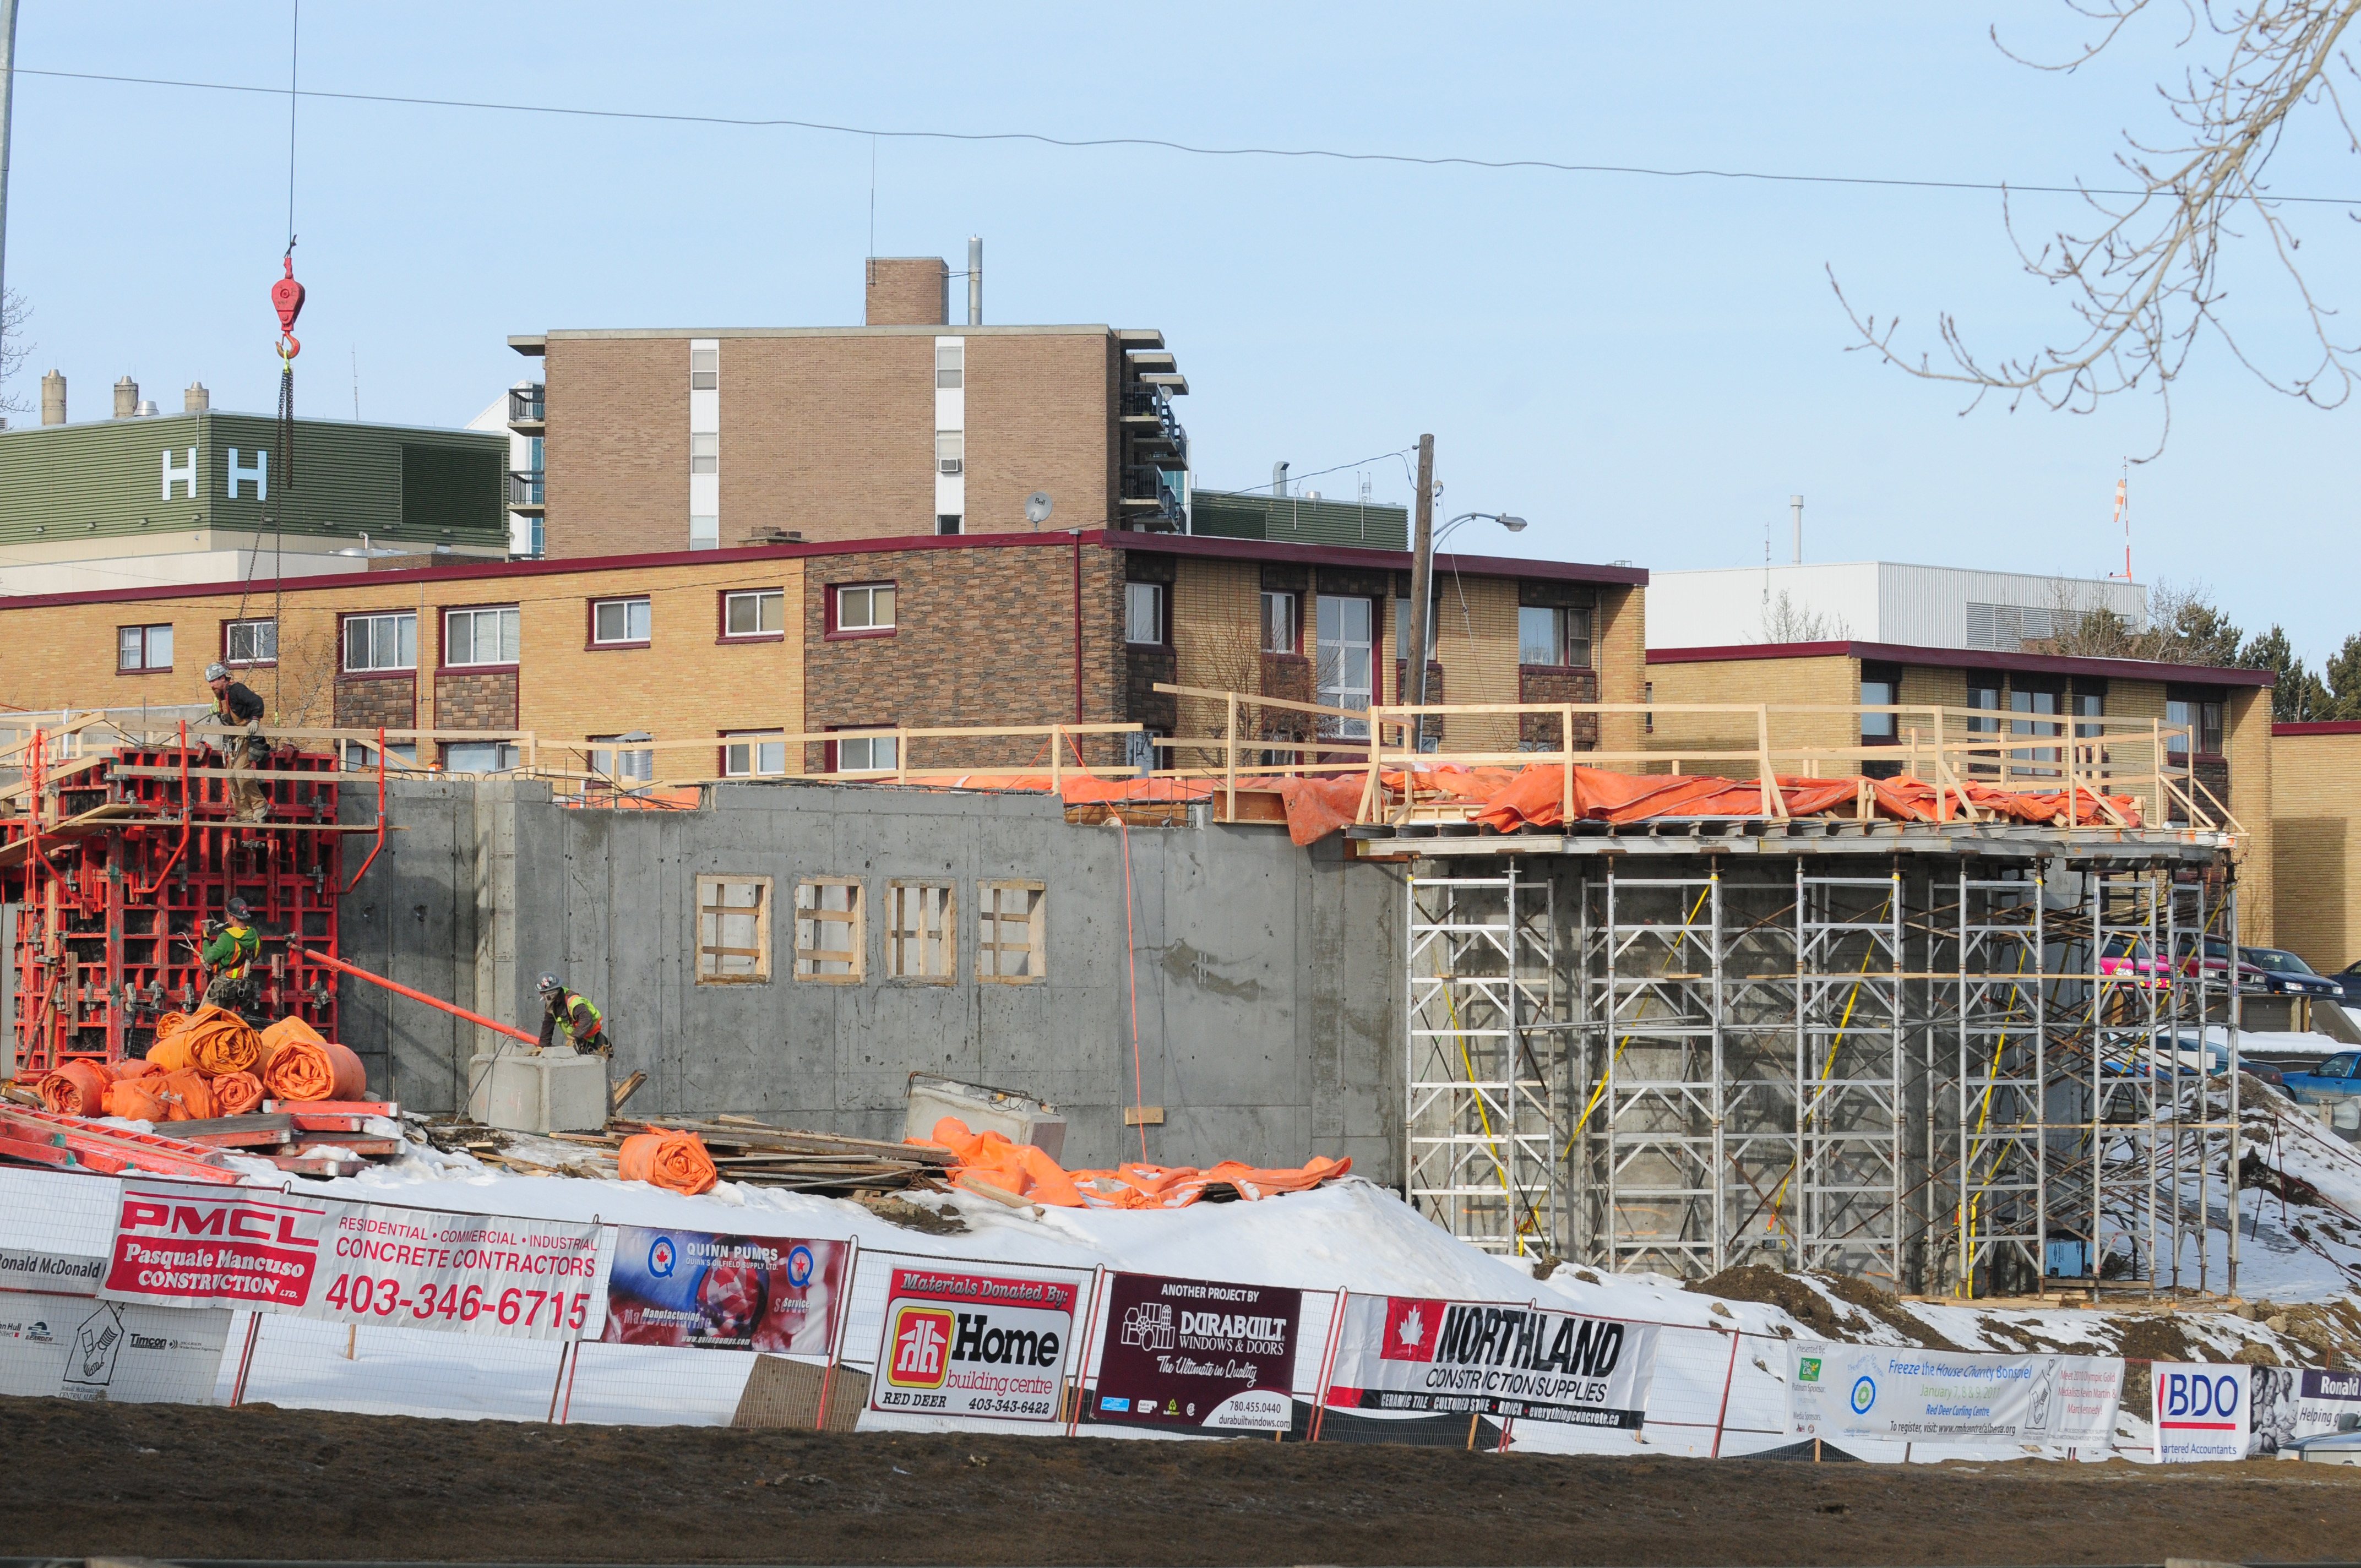 TAKING SHAPE- Construction on the Ronald McDonald House moves forward as fundraising efforts continue. The facility is expected to be completed this fall.